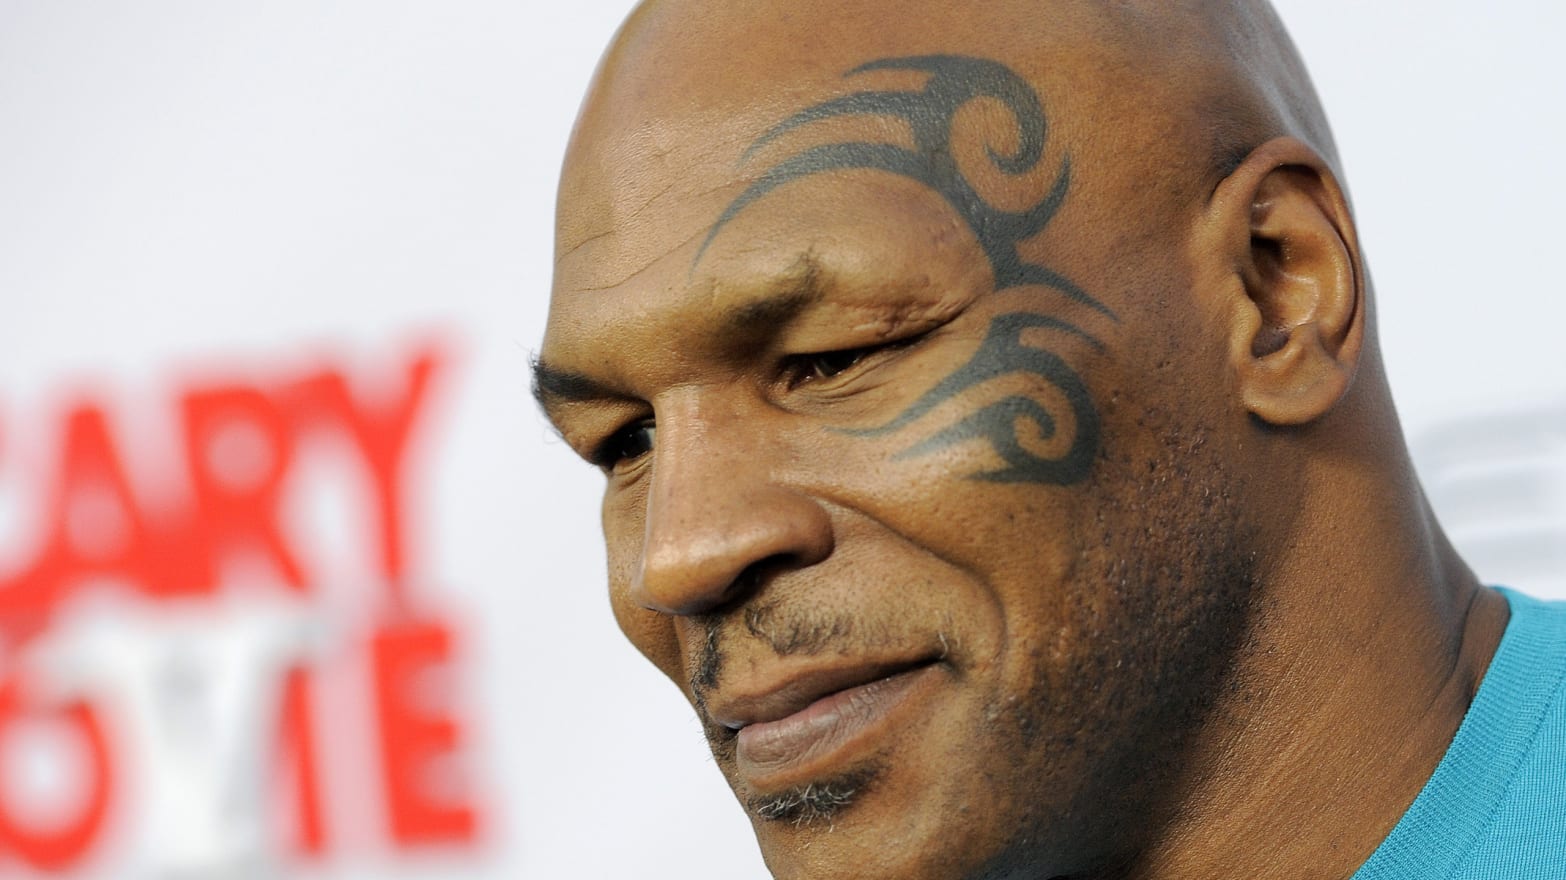 Mike Tyson age 53 is considering a return to the ring